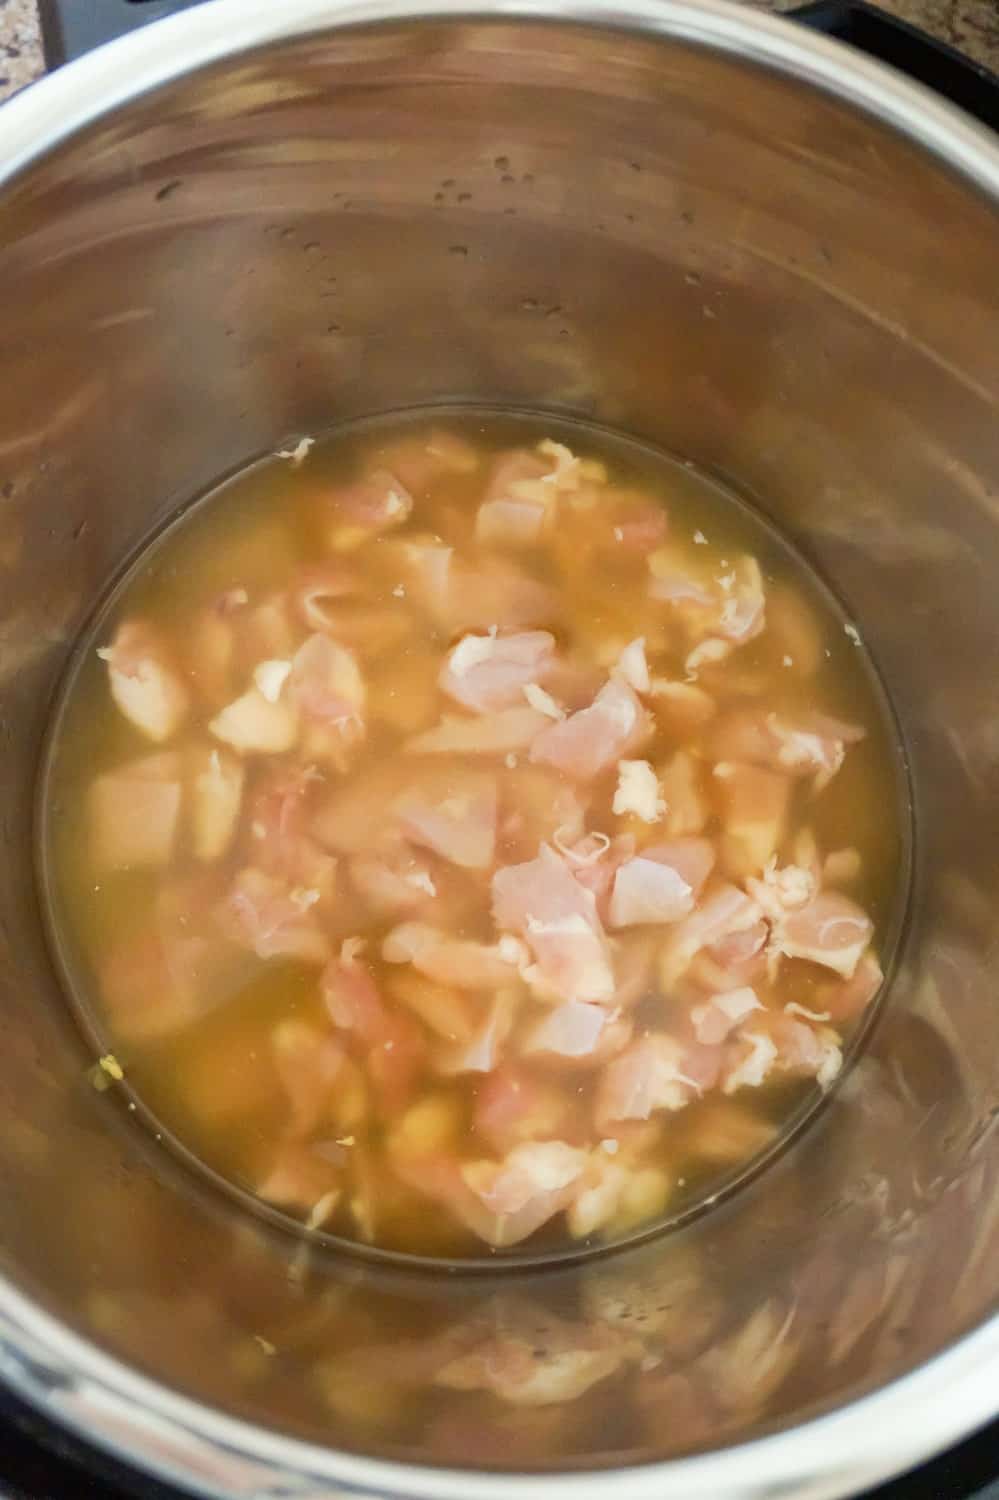 chunks of raw chicken in chicken broth in an Instant Pot